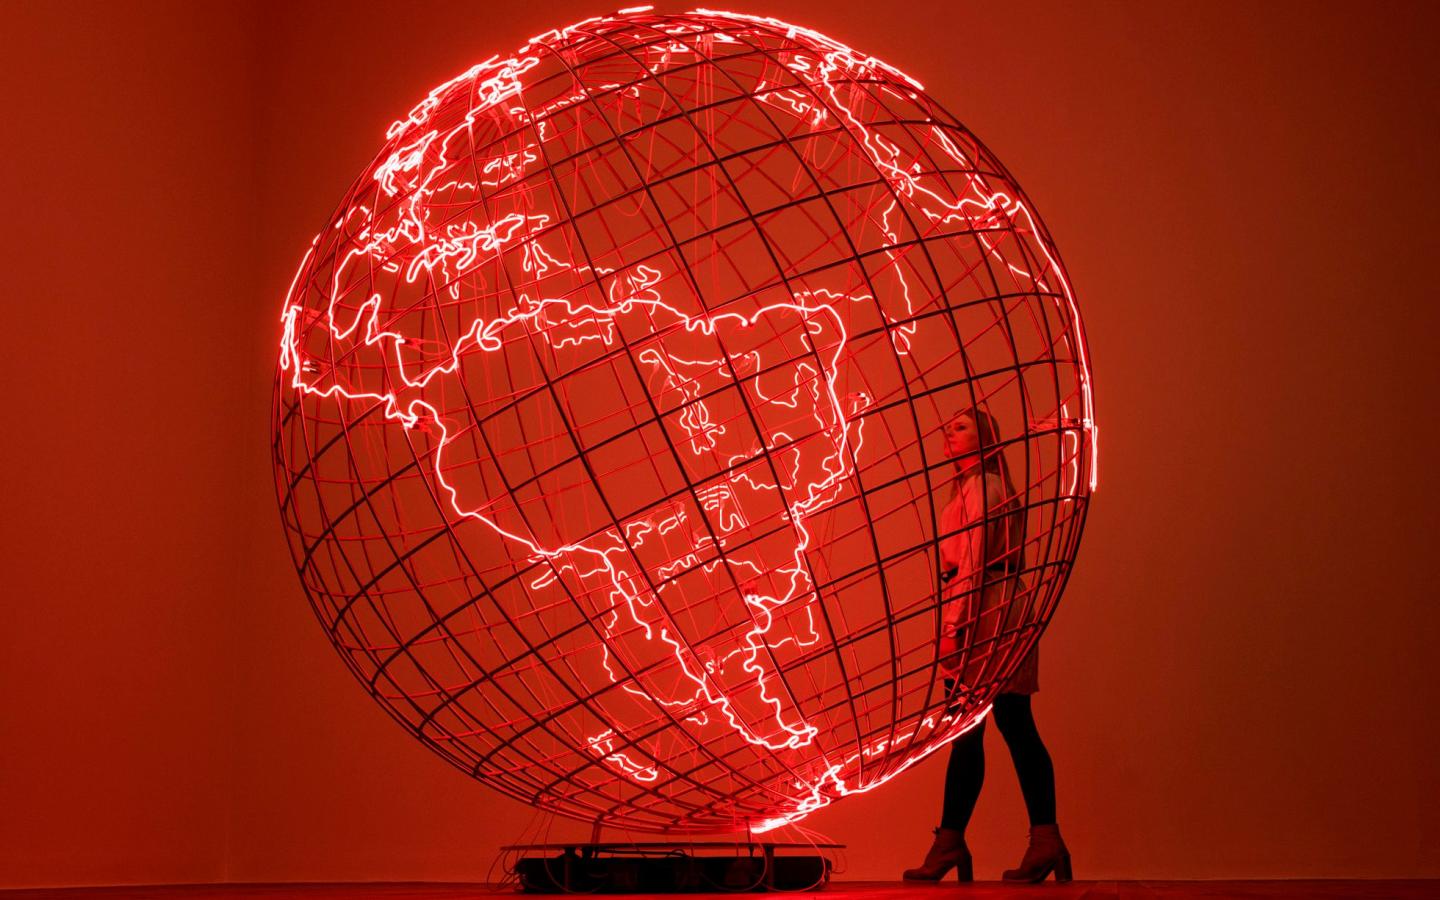 A person stands next to a large, translucent globe that glows red.